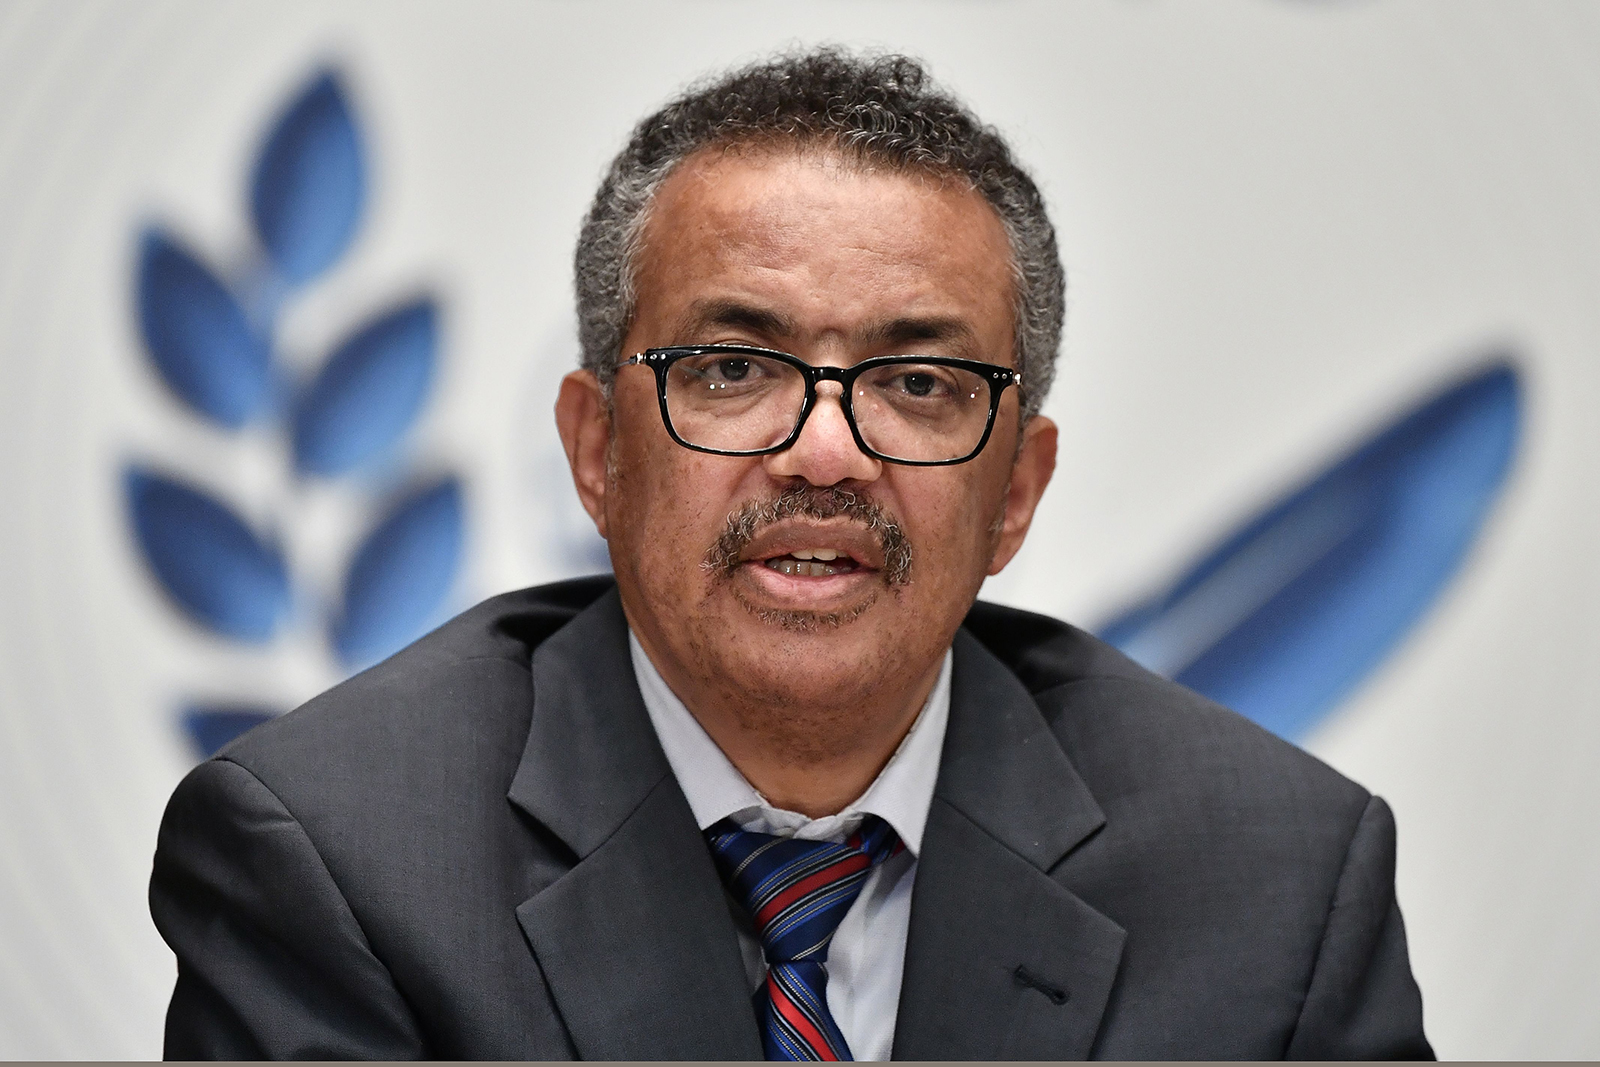 World Health Organization (WHO) Director-General Tedros Adhanom Ghebreyesus attends a press conference at the WHO headquarters in Geneva, Switzerland, on July 3.